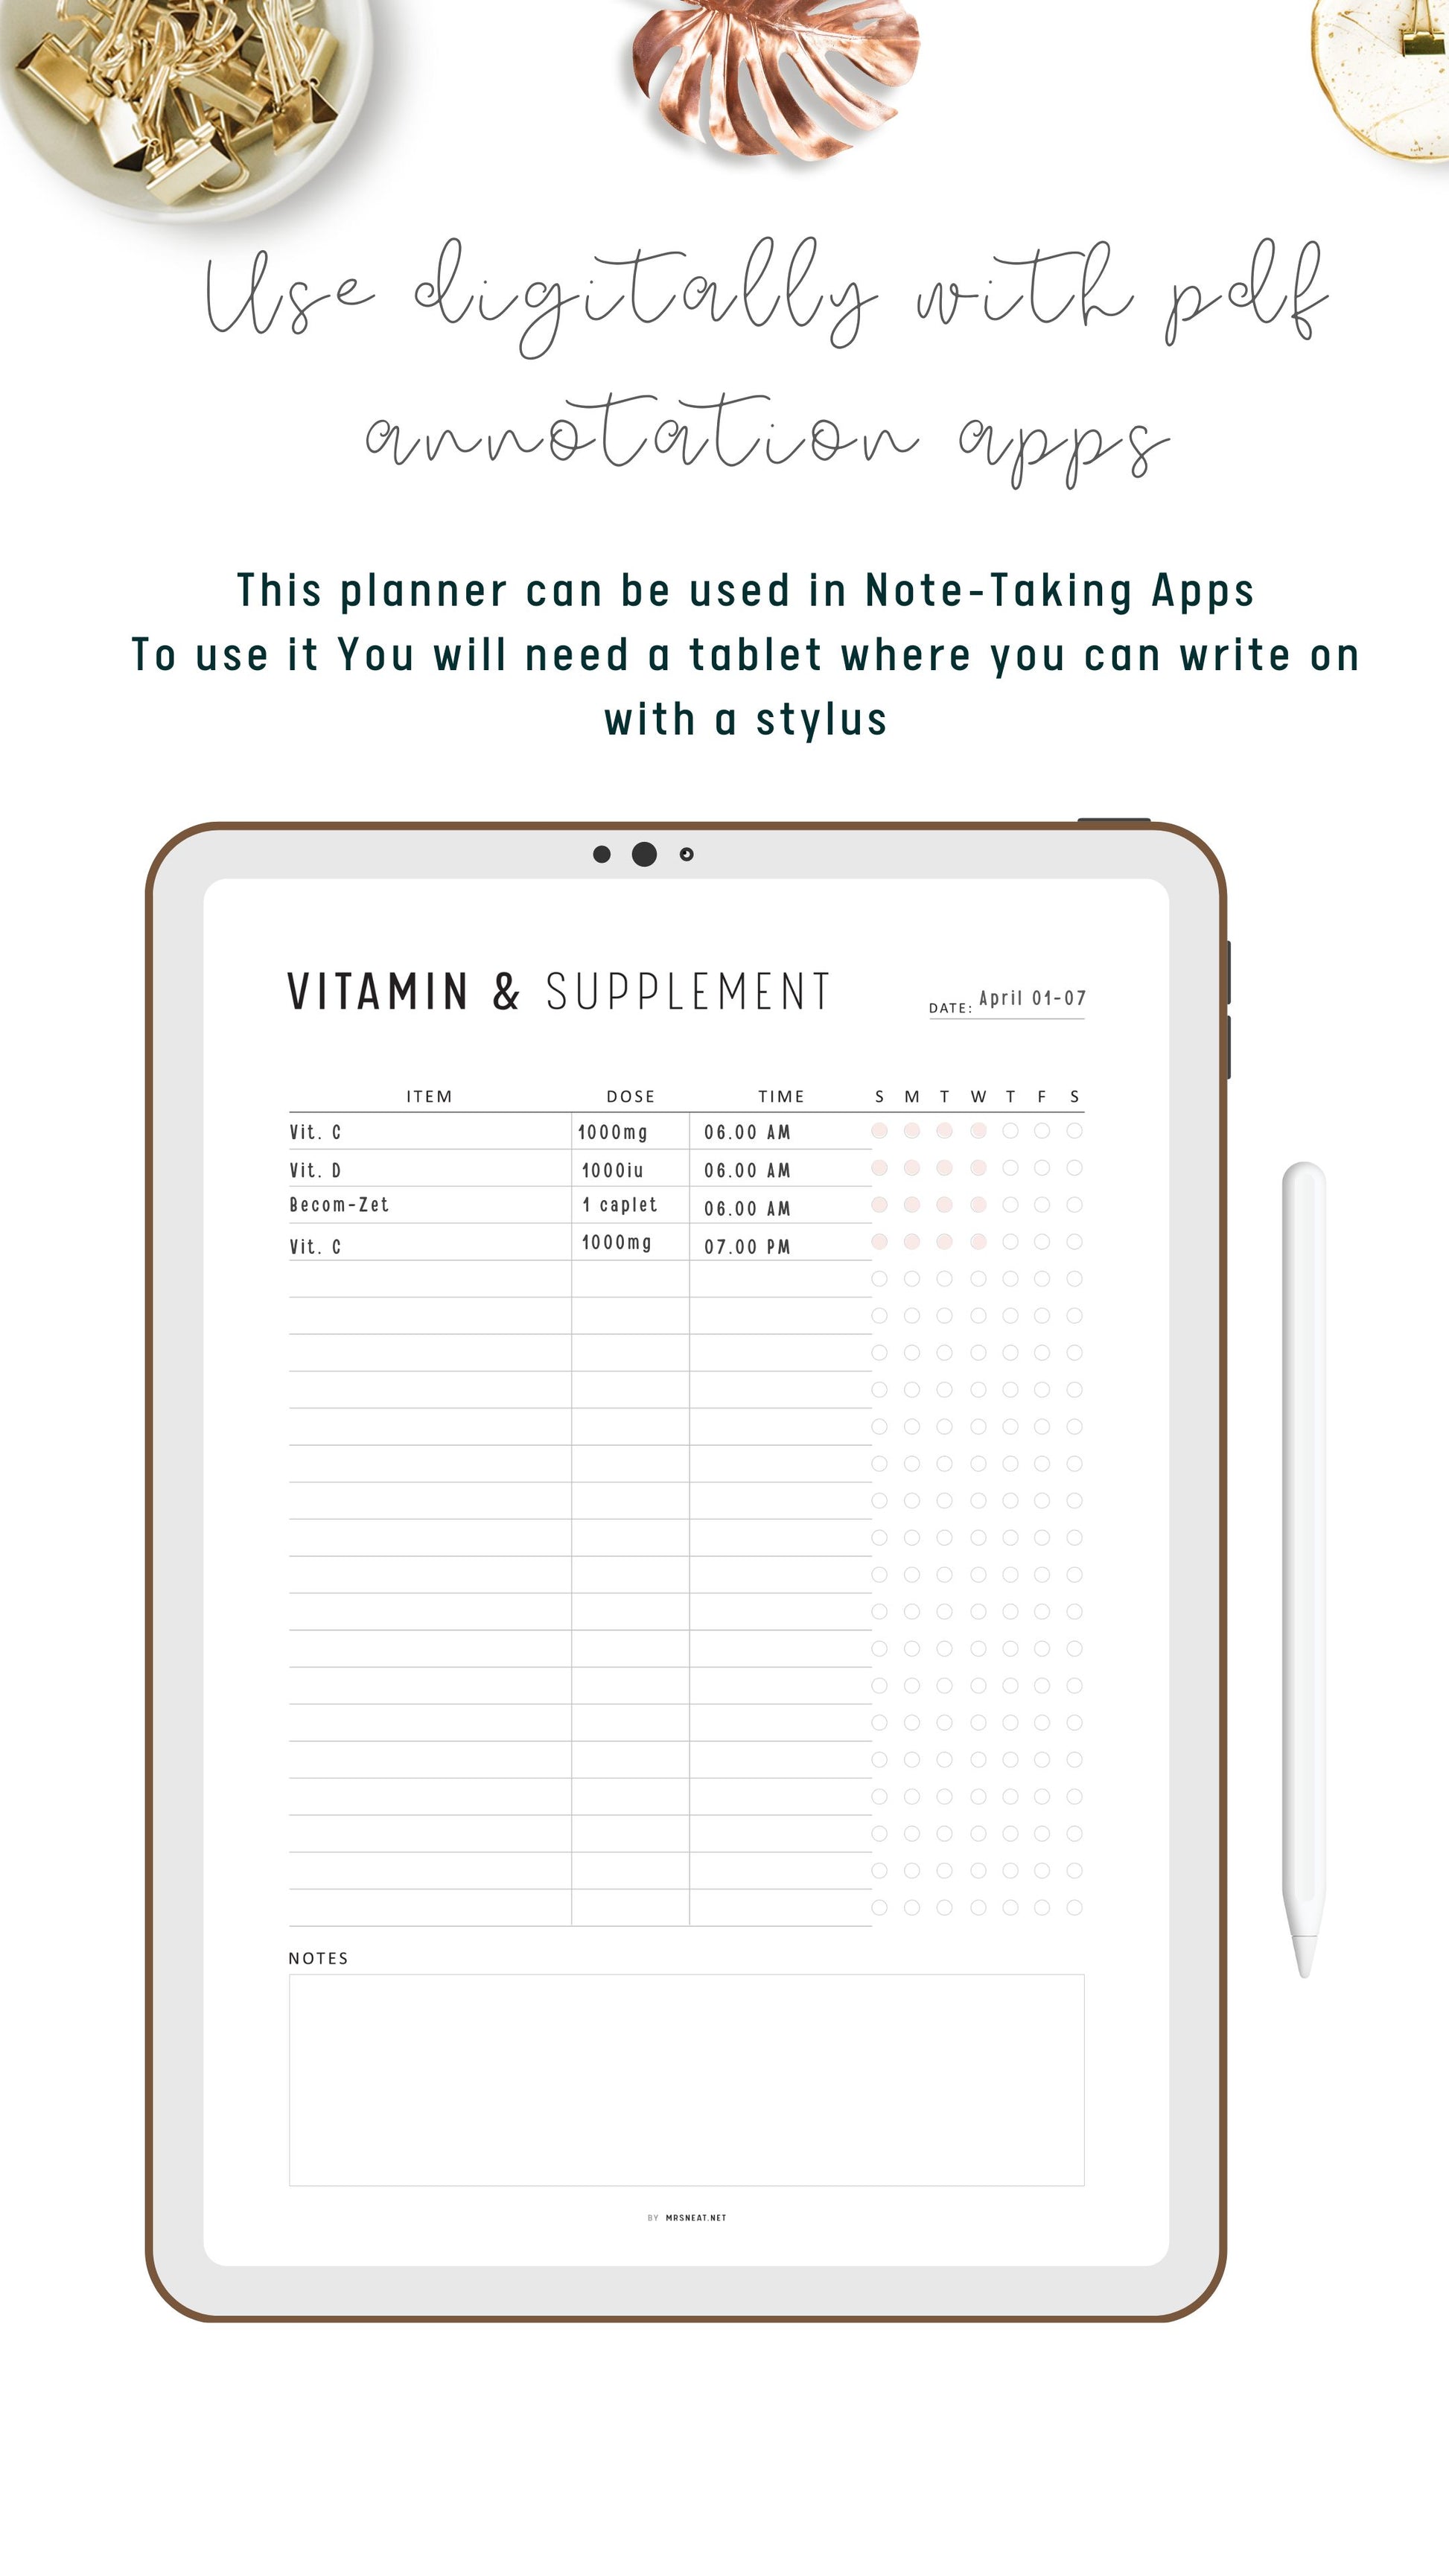 Daily Vitamin & Supplements Tracker Printable, A4, A5, Letter, Half Letter, Digital Planner, Sunday and Monday start included, 4 versions, Digital Planner